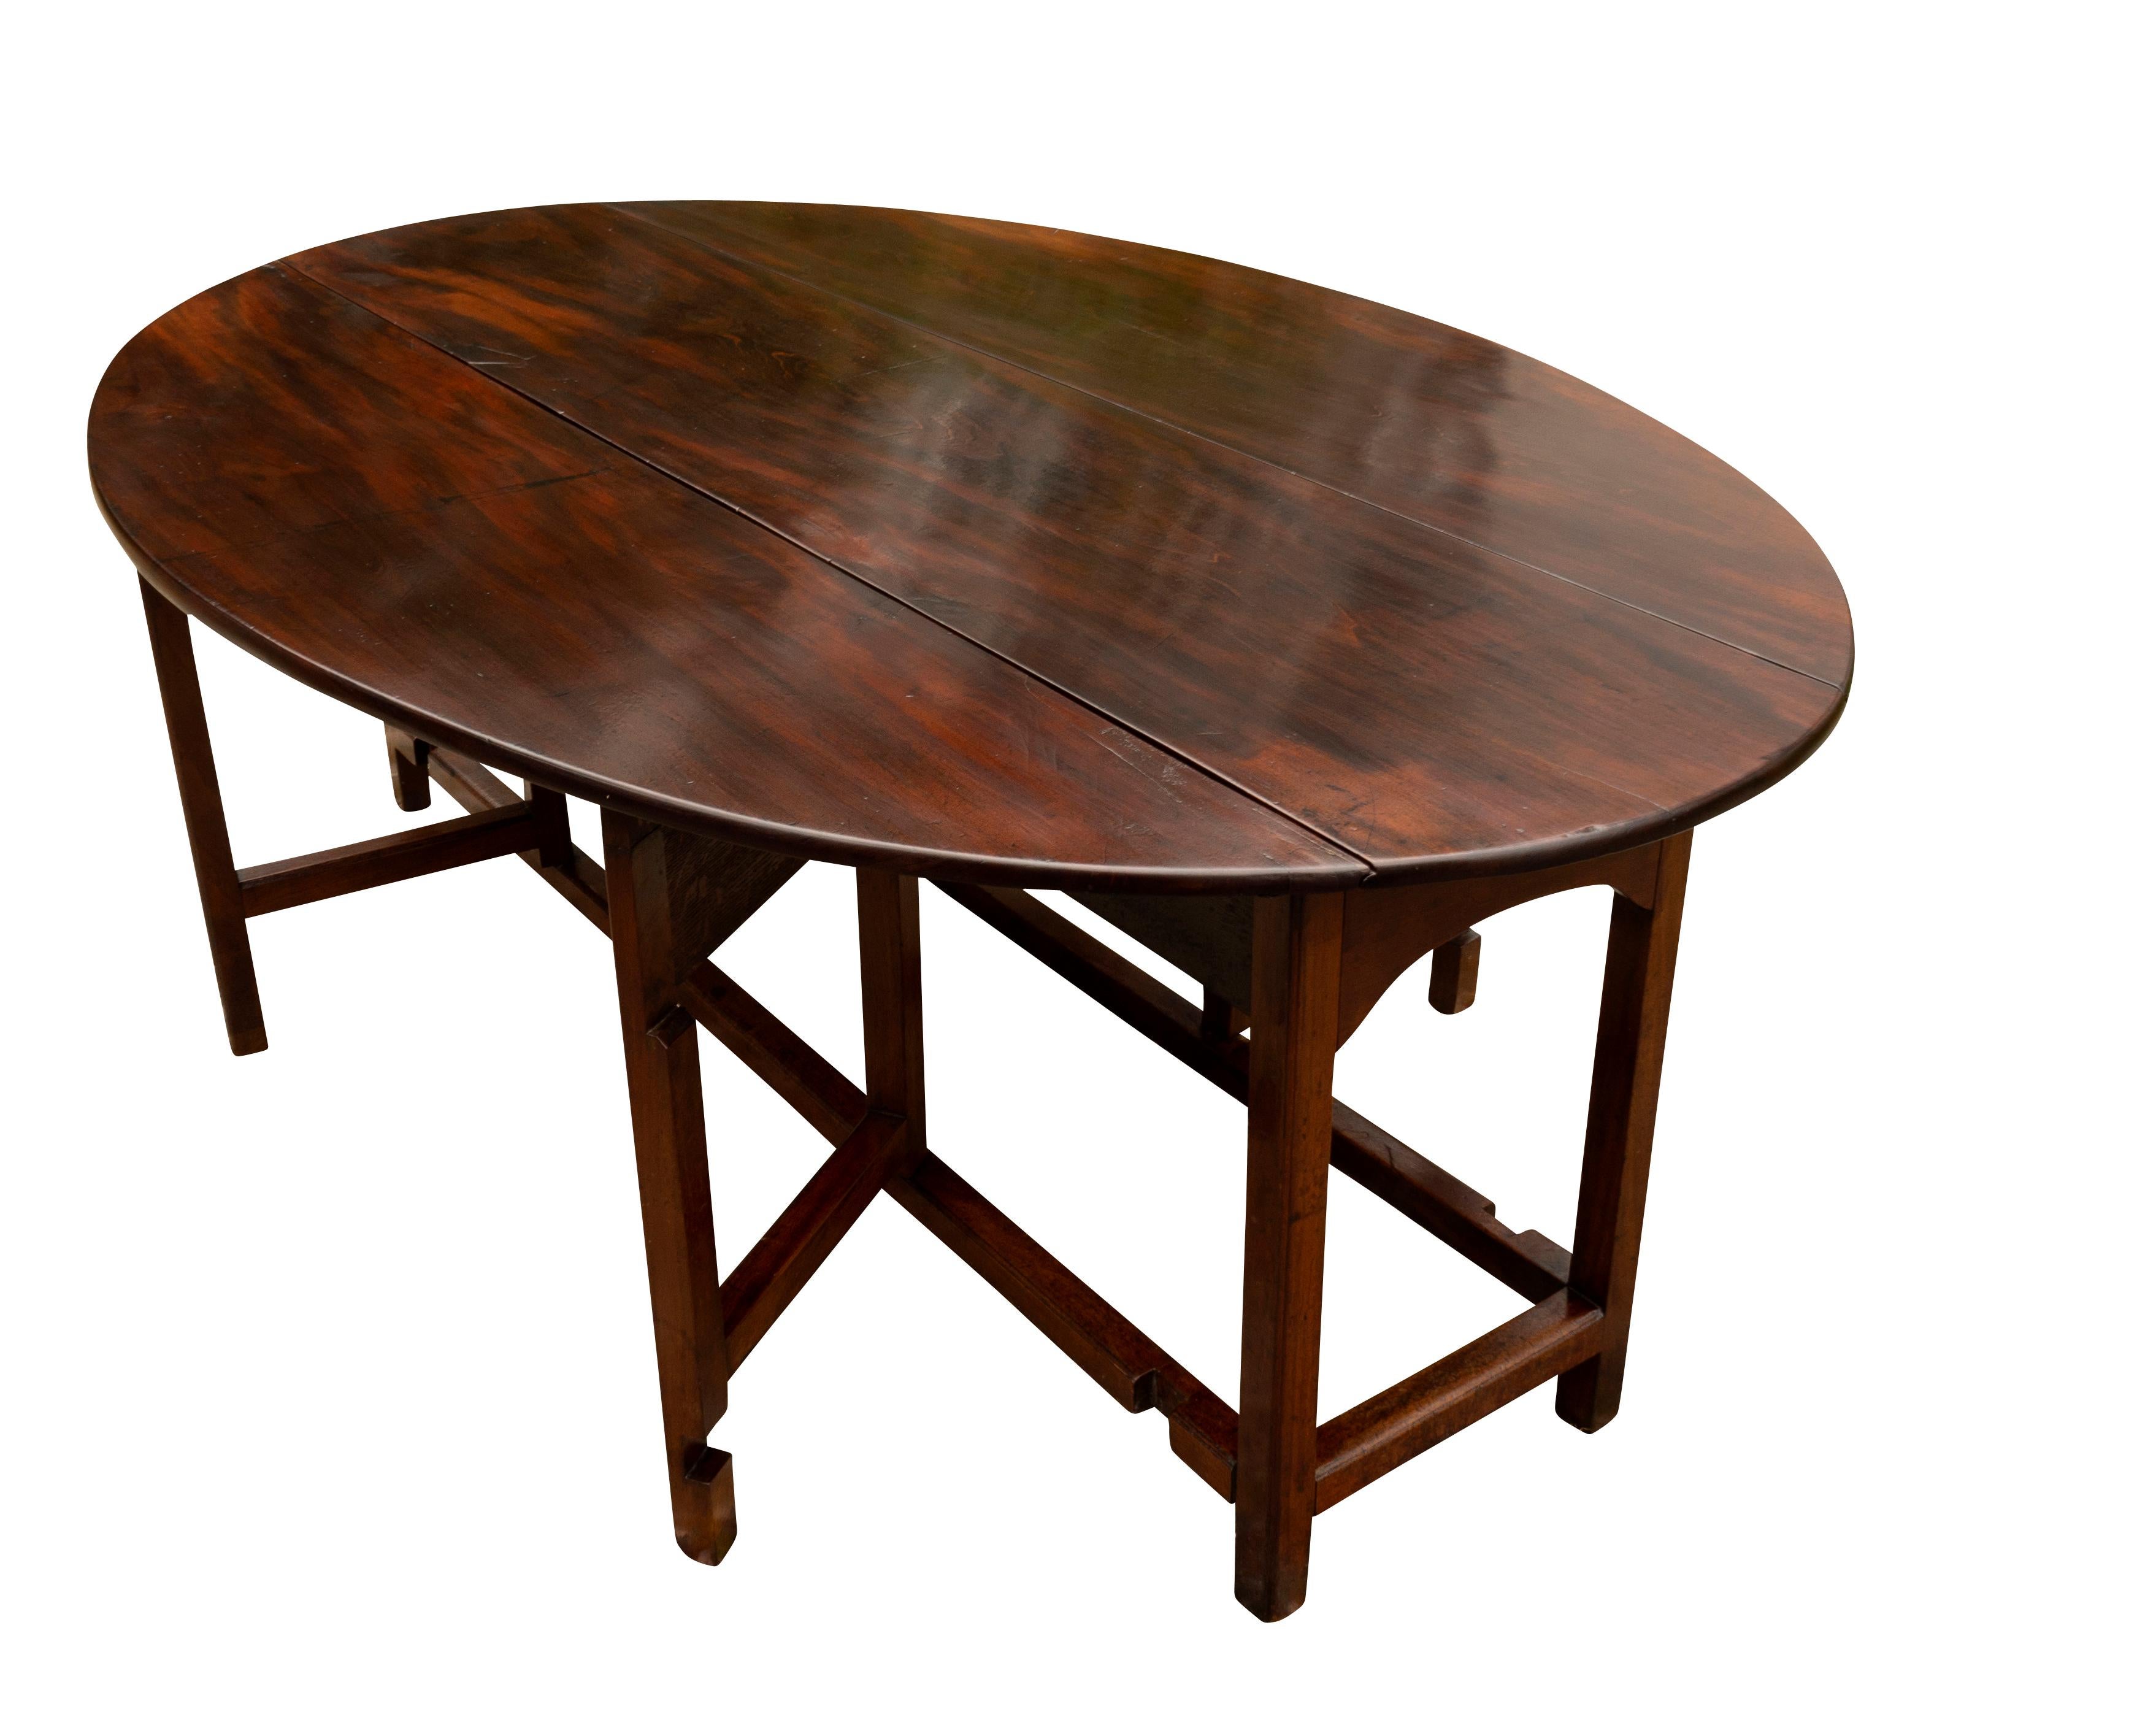 With heavy dense mahogany top and D shaped hinged leaves with square section legs with two swing out legs per side , box stretcher. A good period table with added height for todays seating. The mahogany with very dark color. My restorer said that